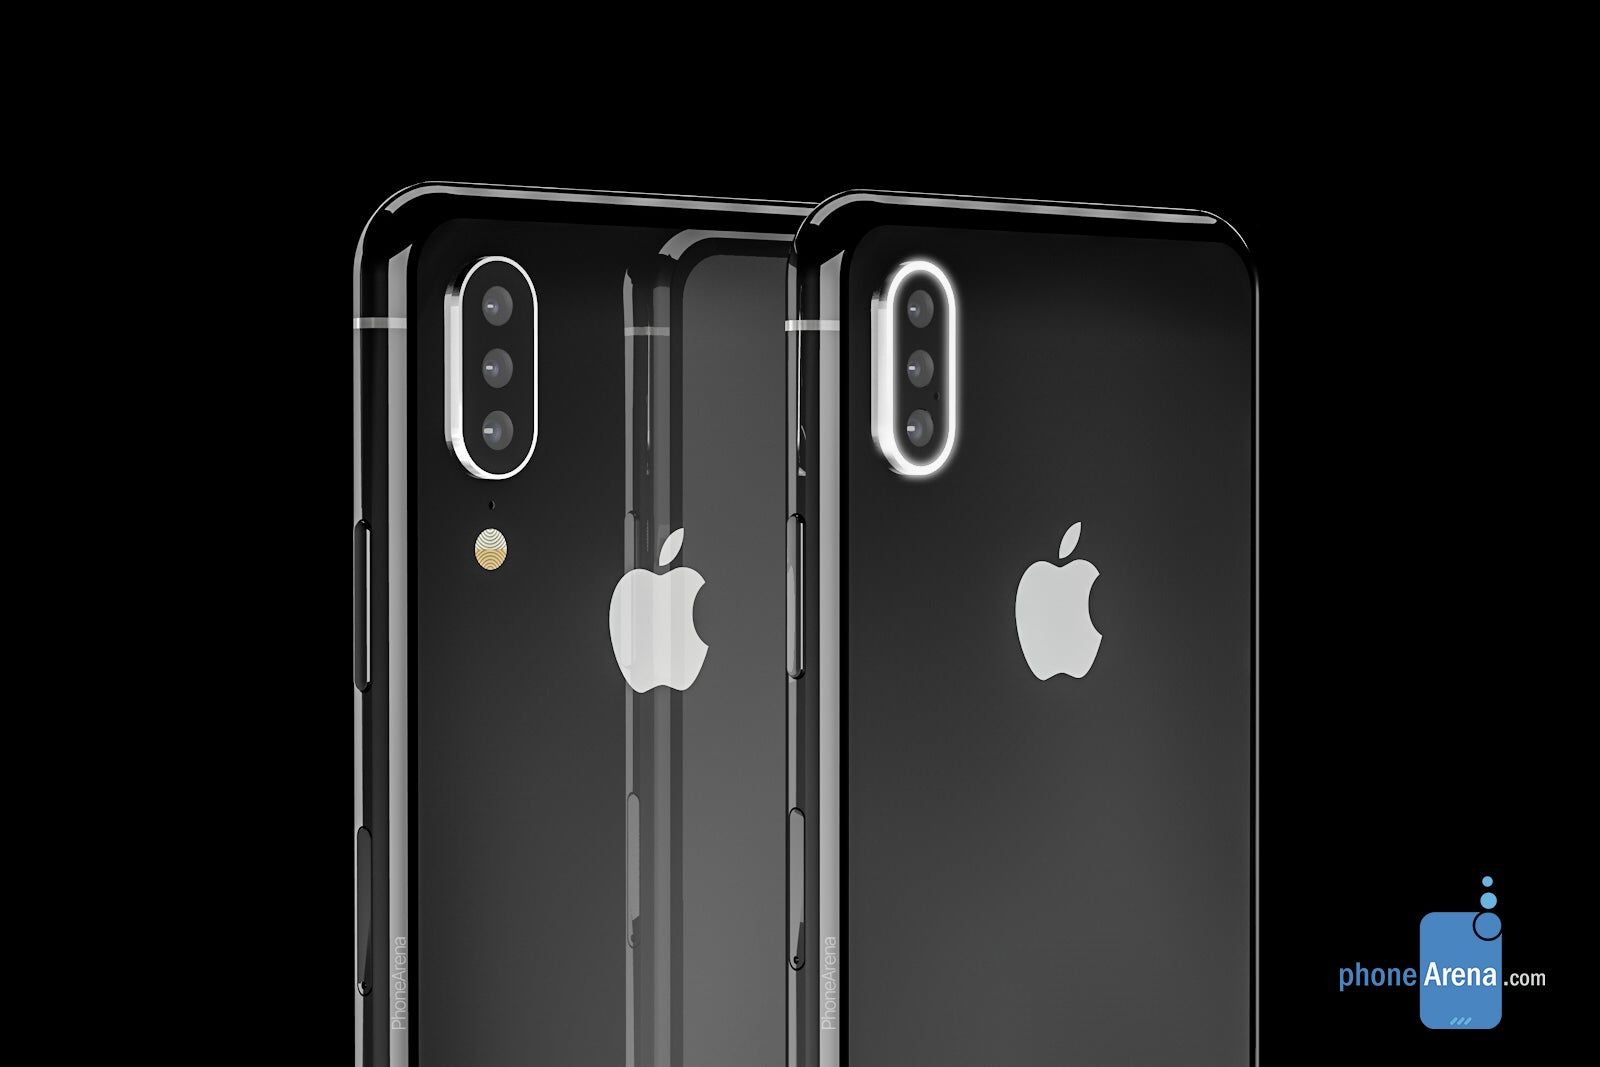 iPhone 11 running iOS 13 with Dark Mode envisioned in 3D renders